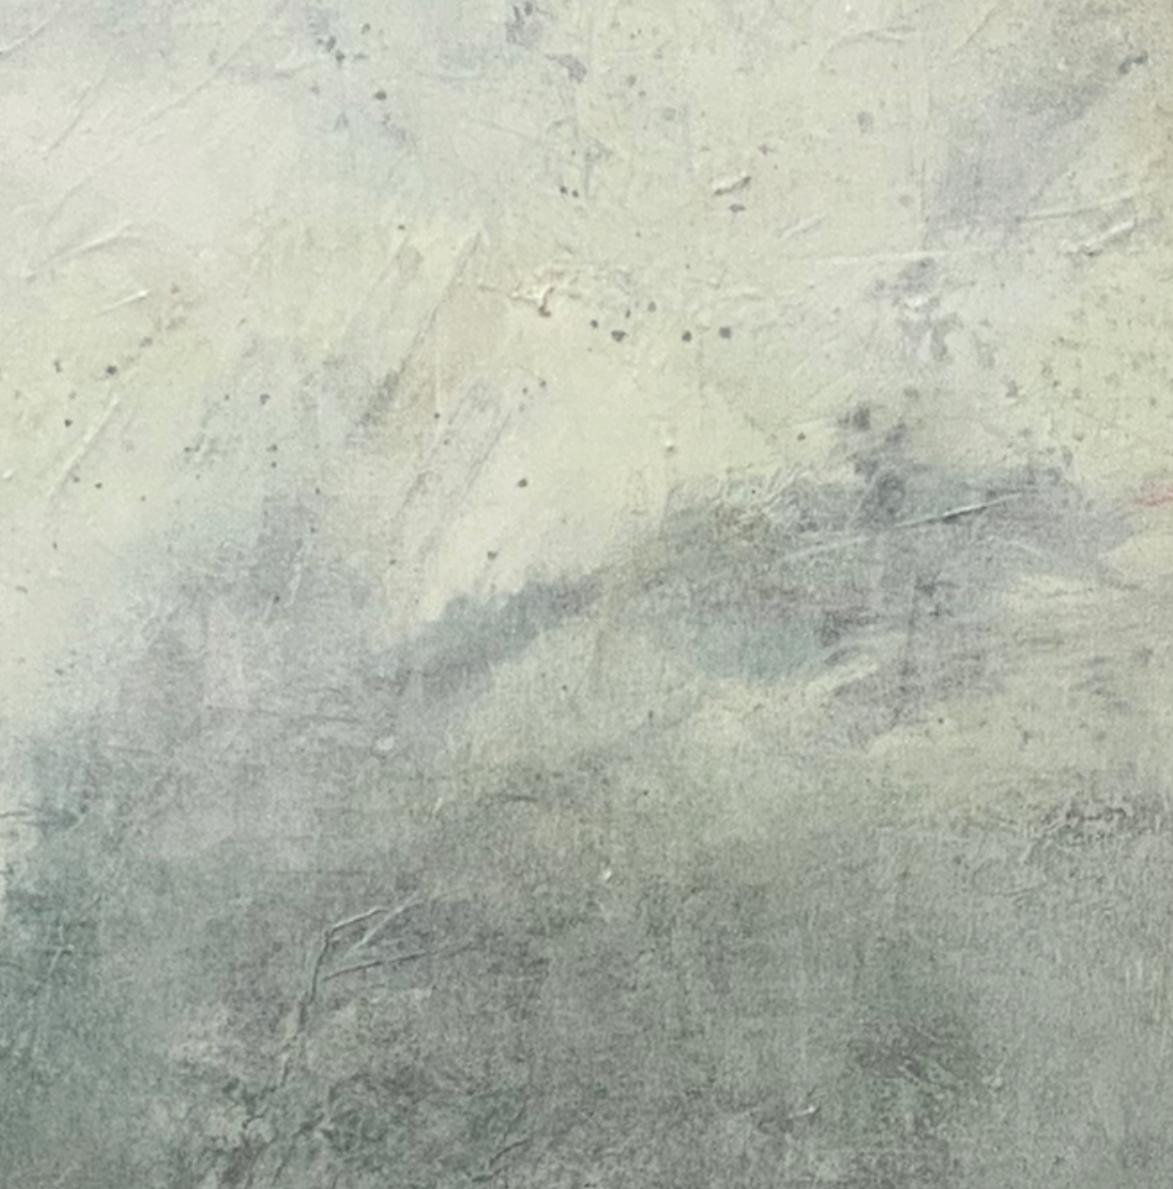 It was a misty day, Contemporary landscape, seafoam, ethereal abstract,   - Gray Landscape Painting by Juanita Bellavance 